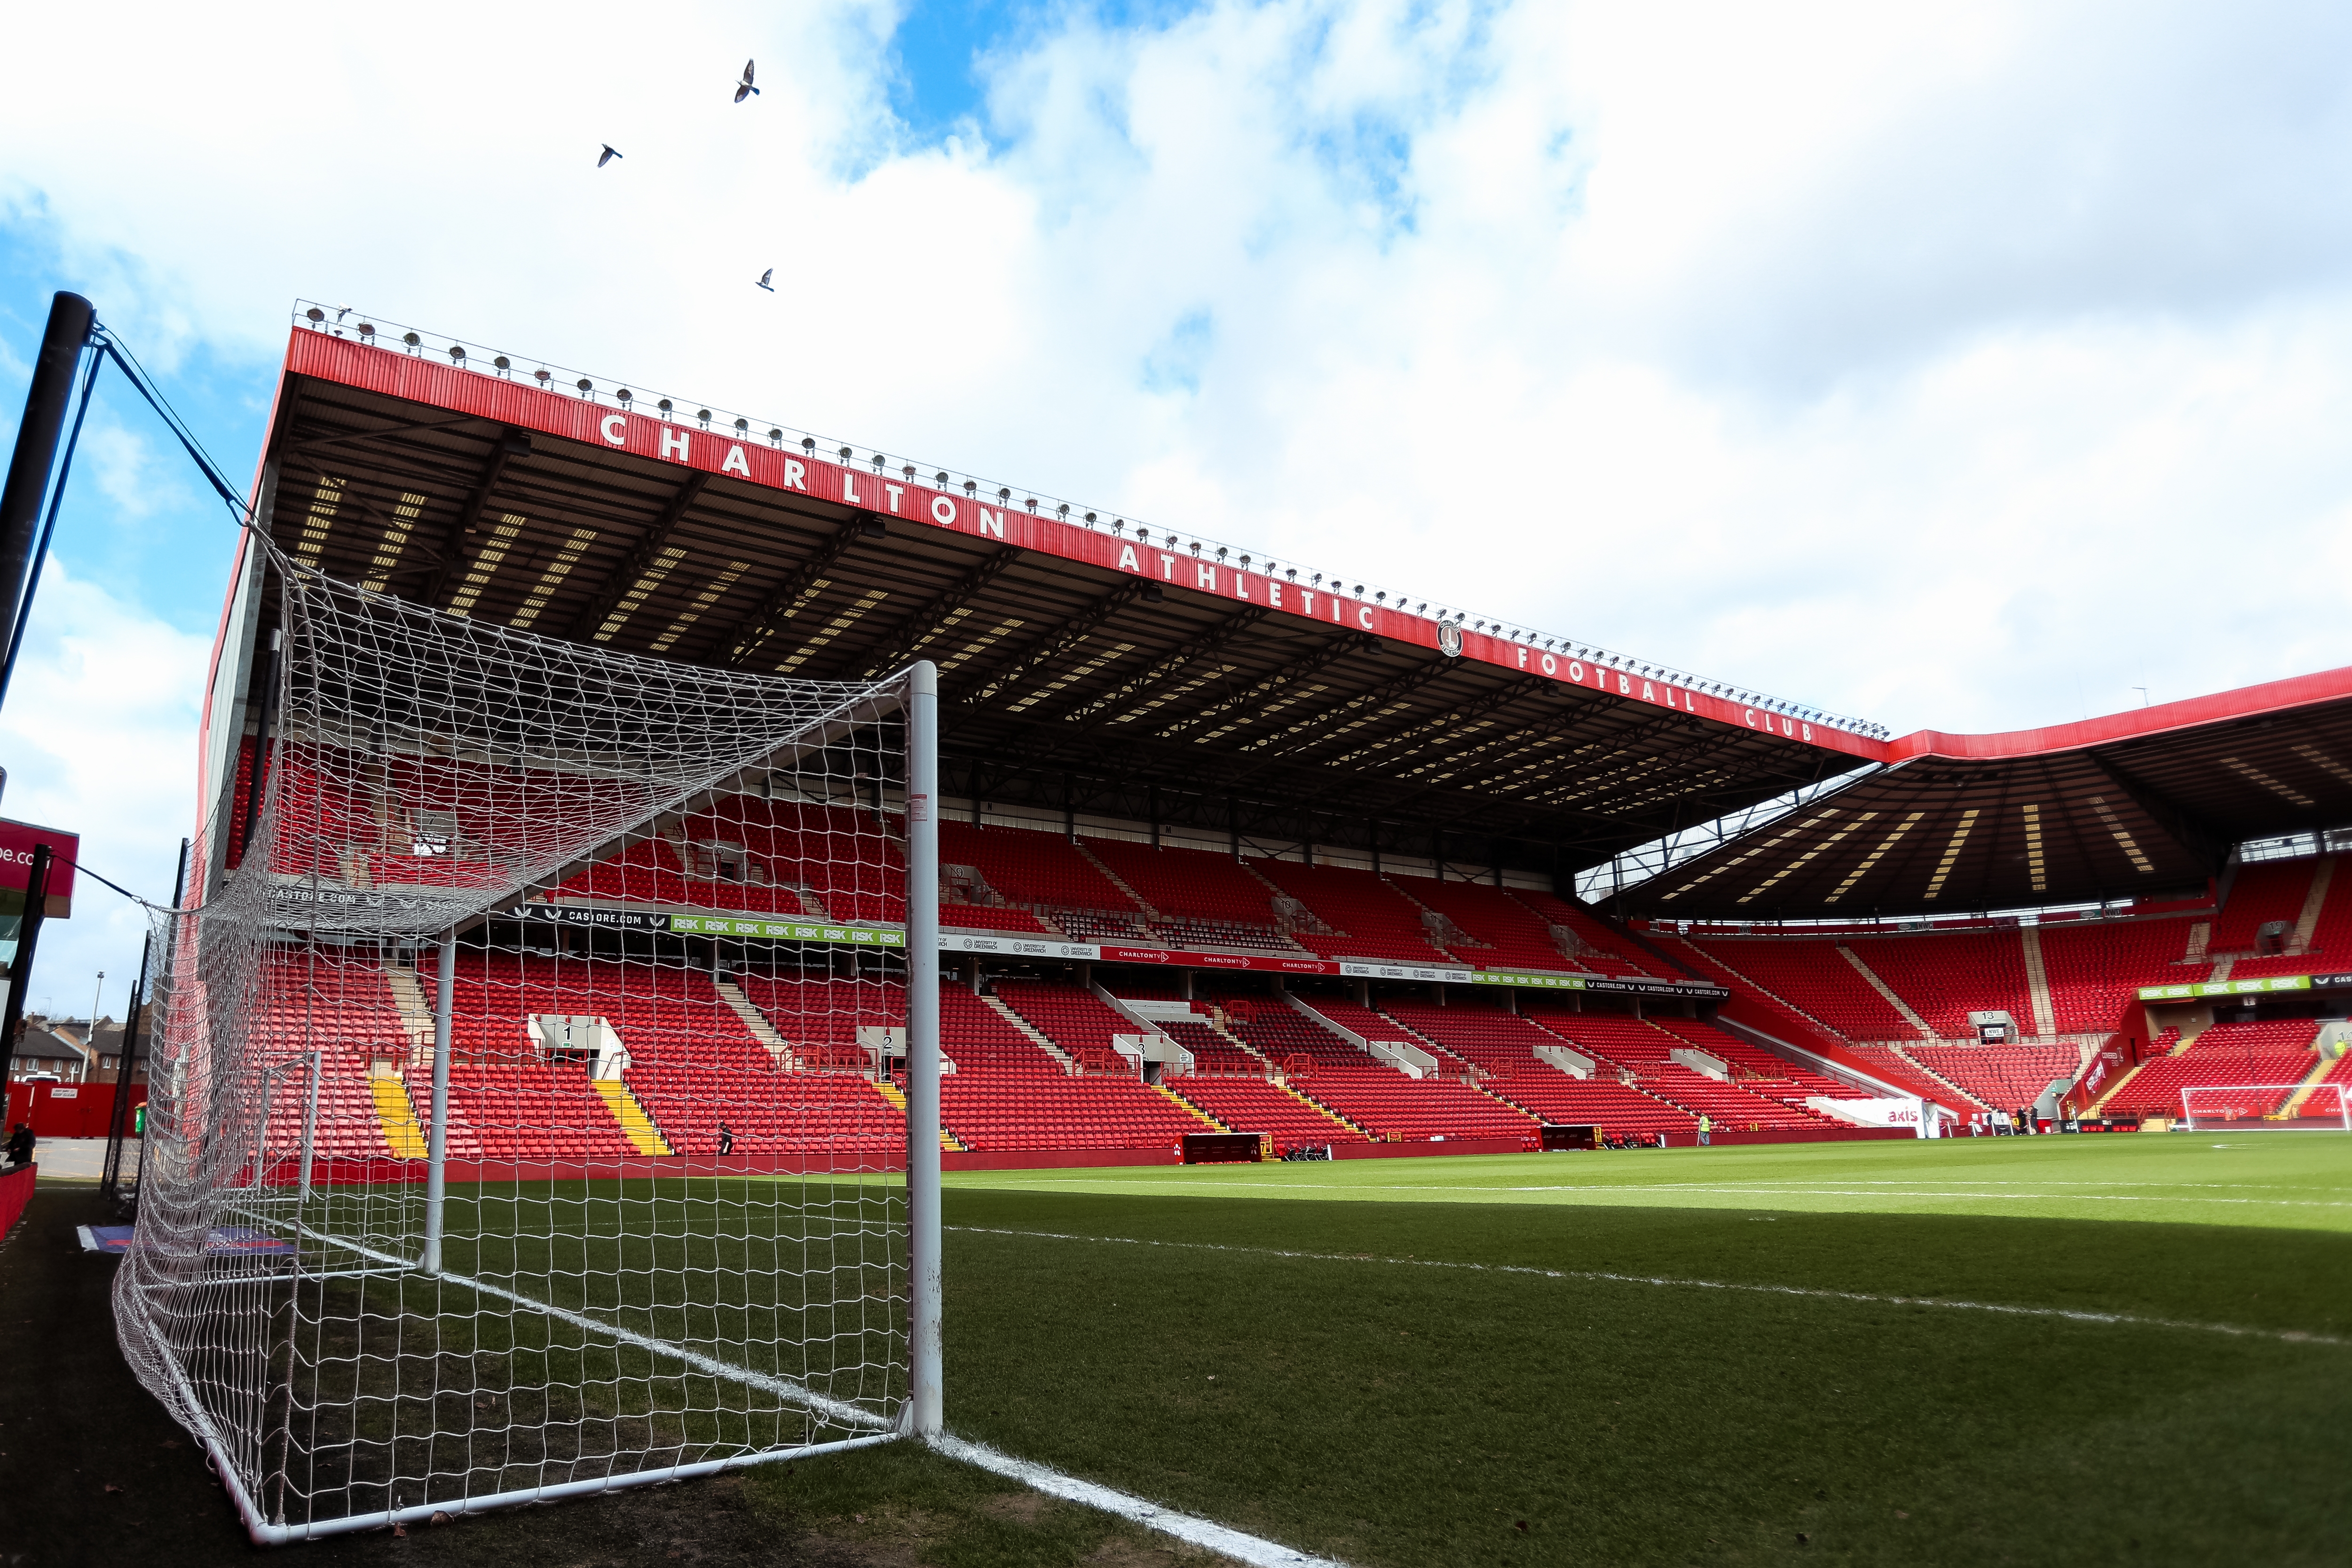 Former Premier League stadium that fell into disrepair is now an